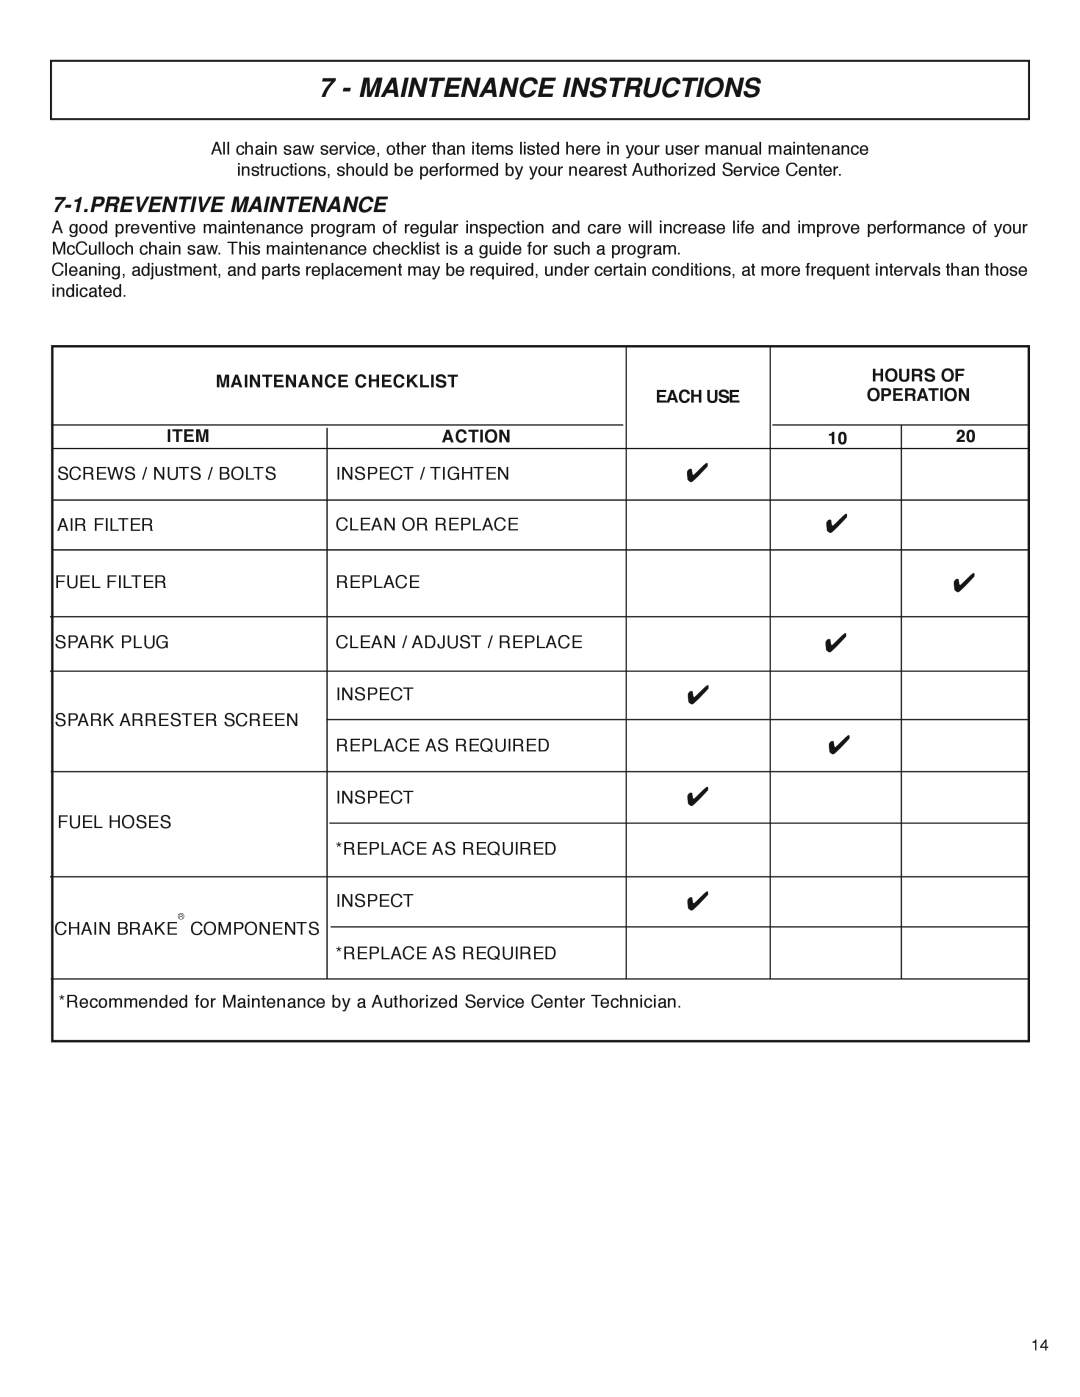 McCulloch MS4016PAVCC, MS4018PAVCC Maintenance Instructions, Preventive Maintenance, Maintenance Checklist, Hours Of 